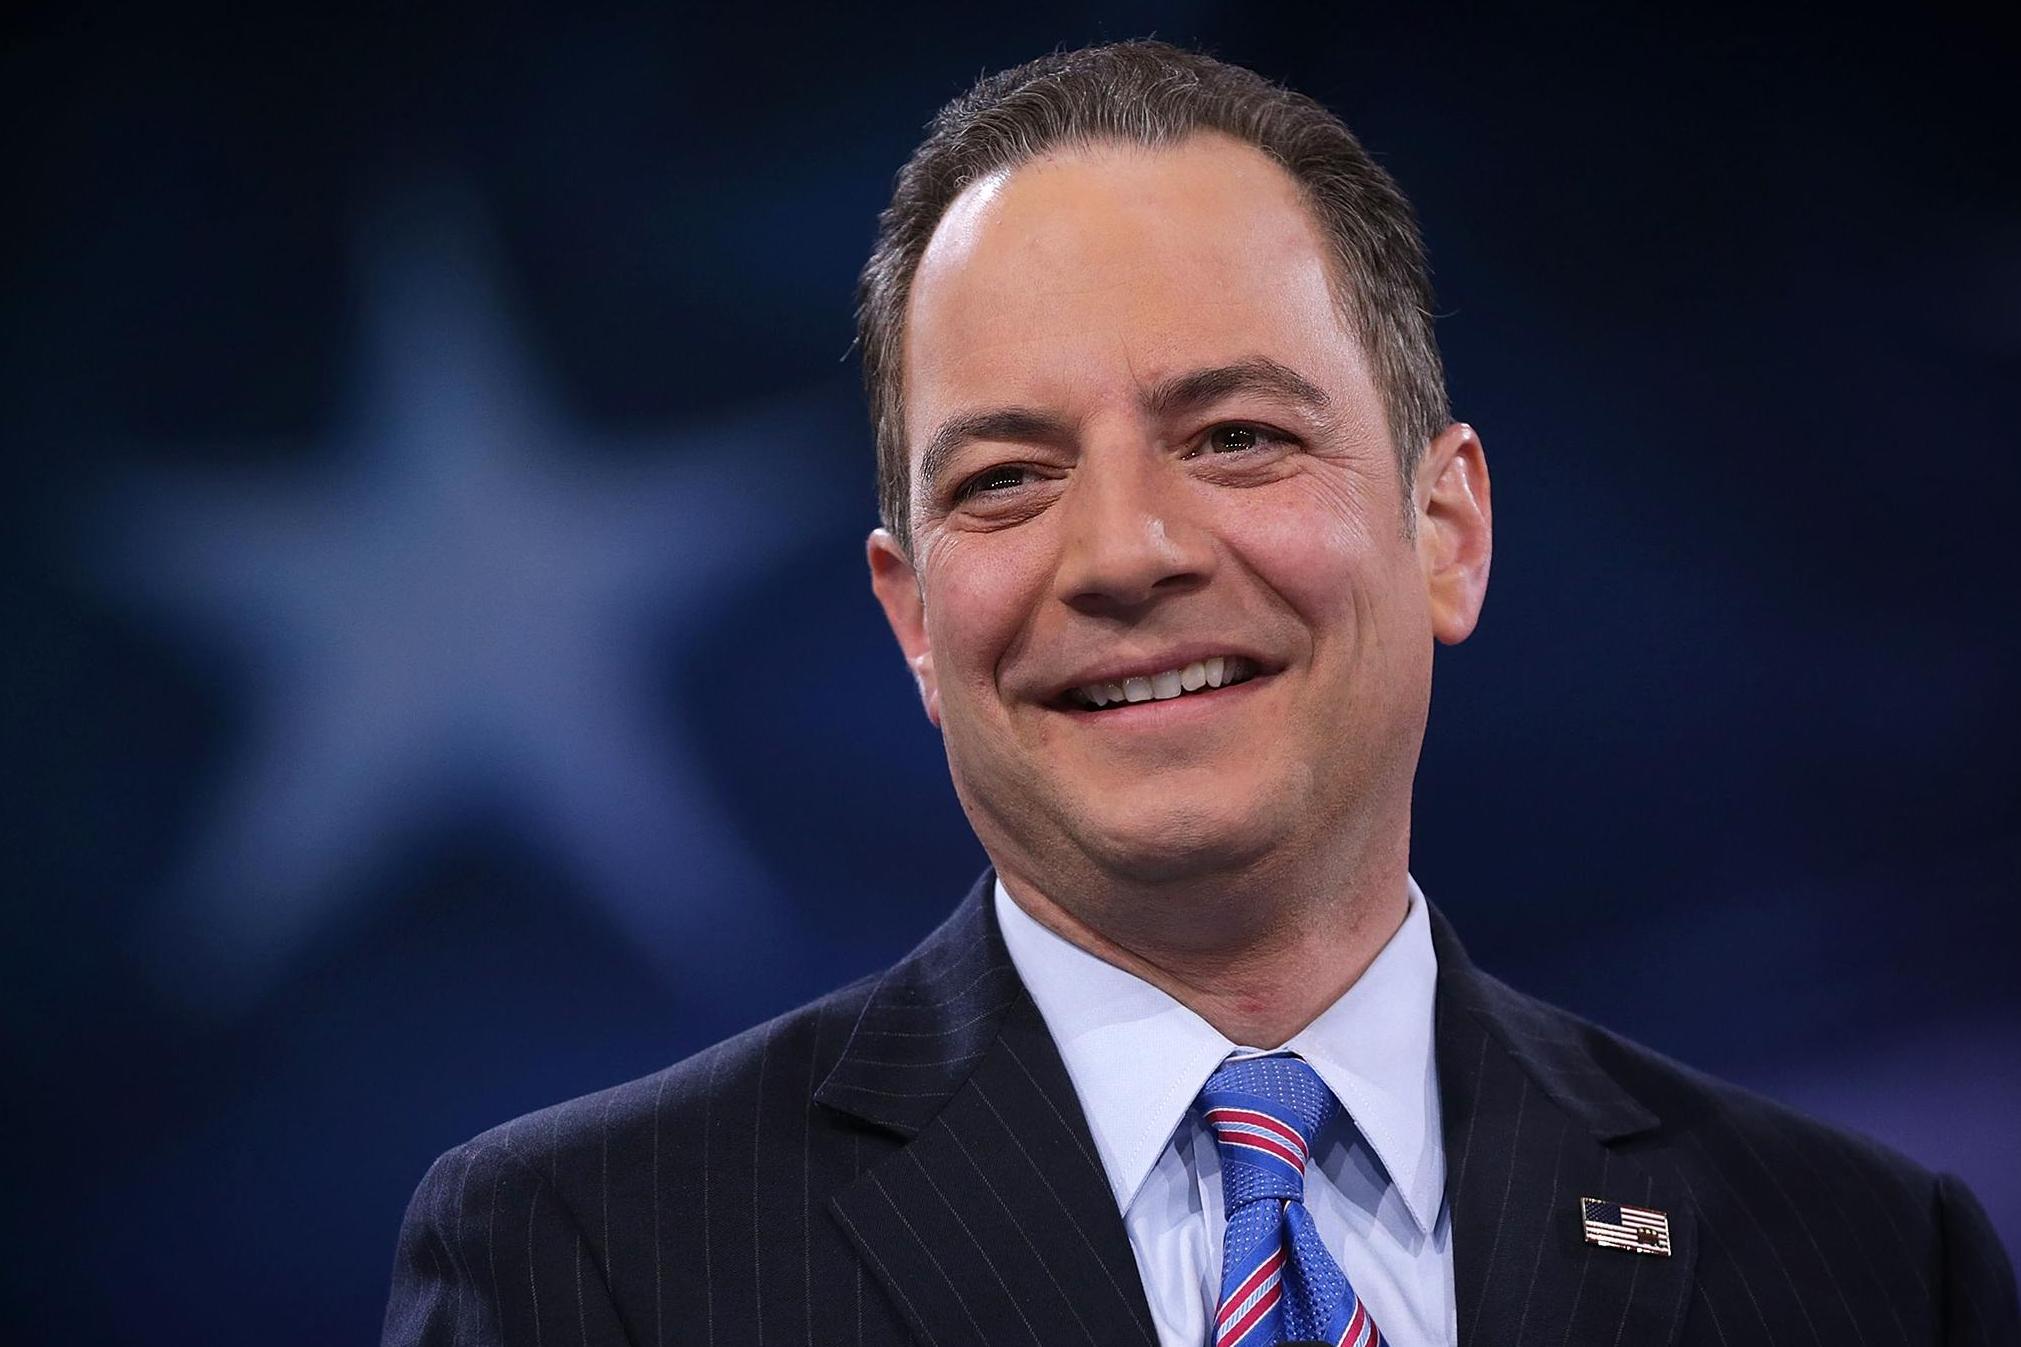 Chairman of the Republican National Committee, Reince Priebus, has backed Donald Trump